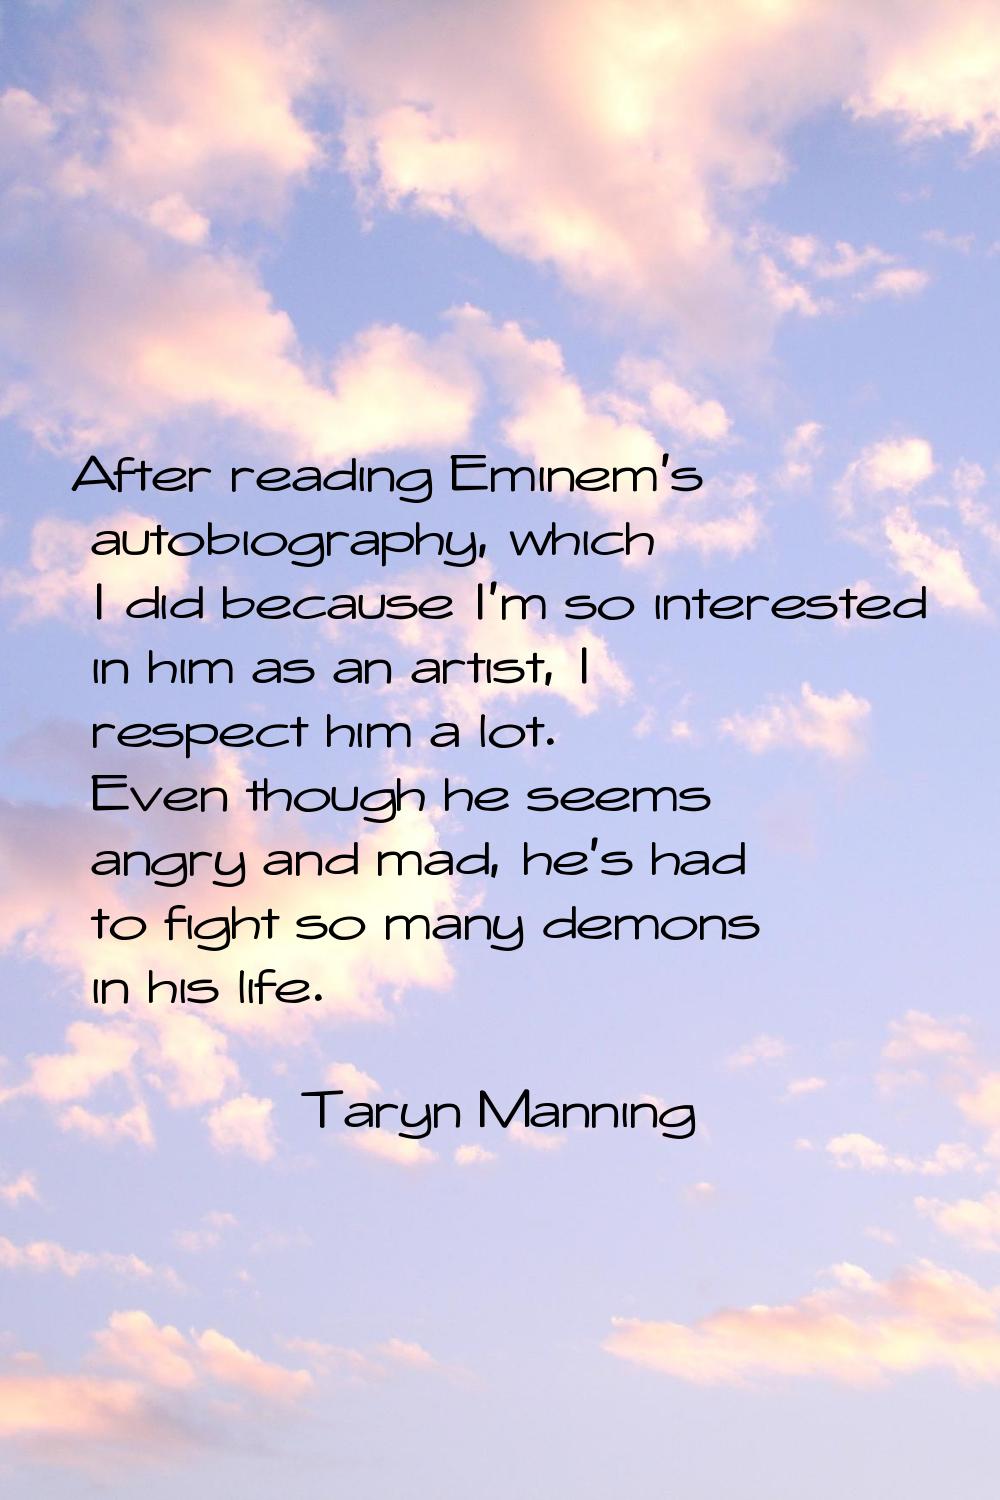 After reading Eminem's autobiography, which I did because I'm so interested in him as an artist, I 